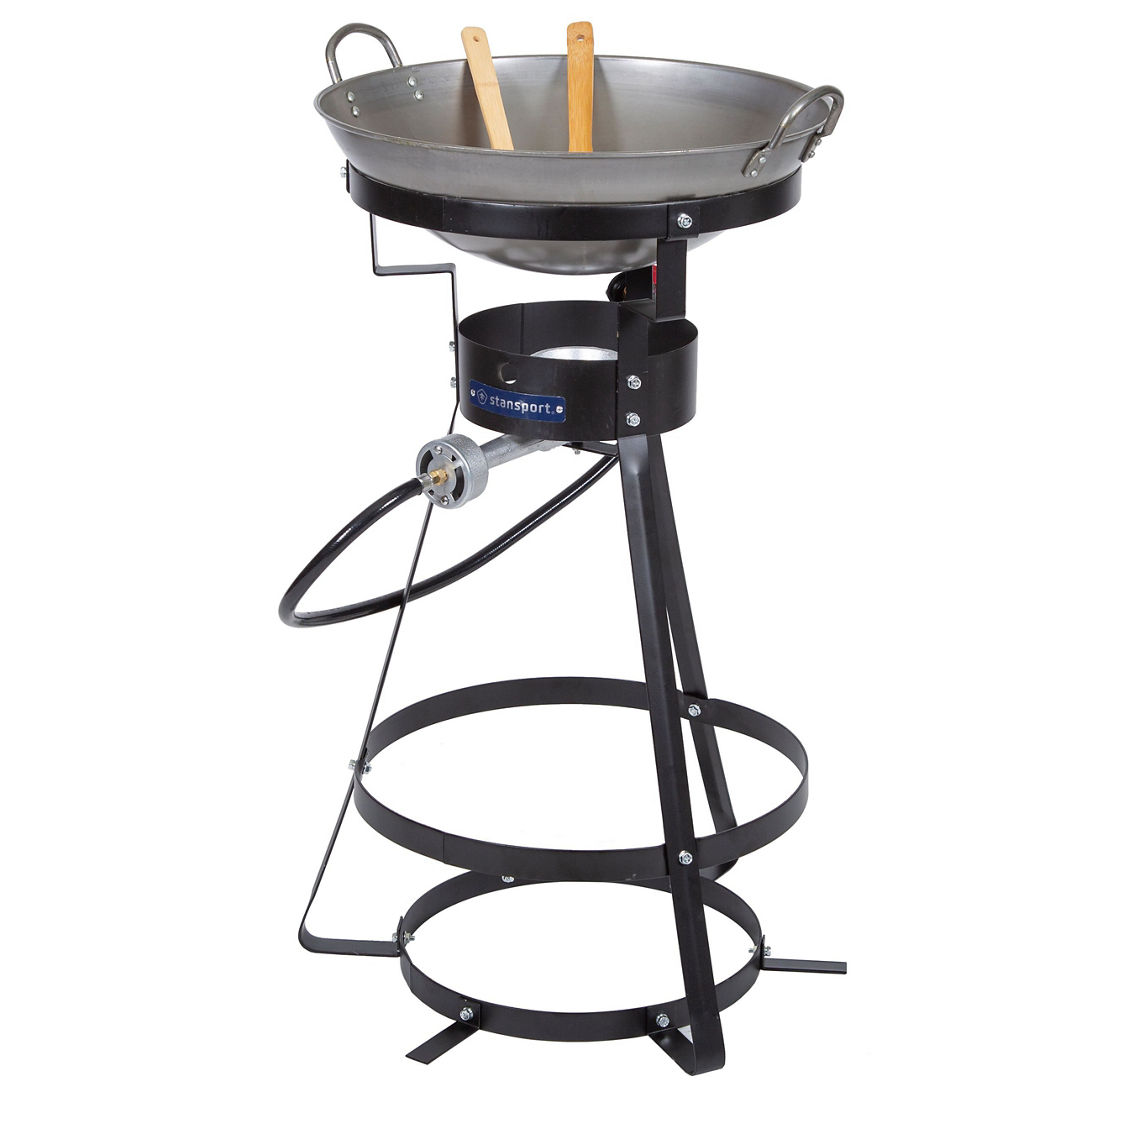 Stansport Camp Stove with Carbon Steel Wok - Image 2 of 5